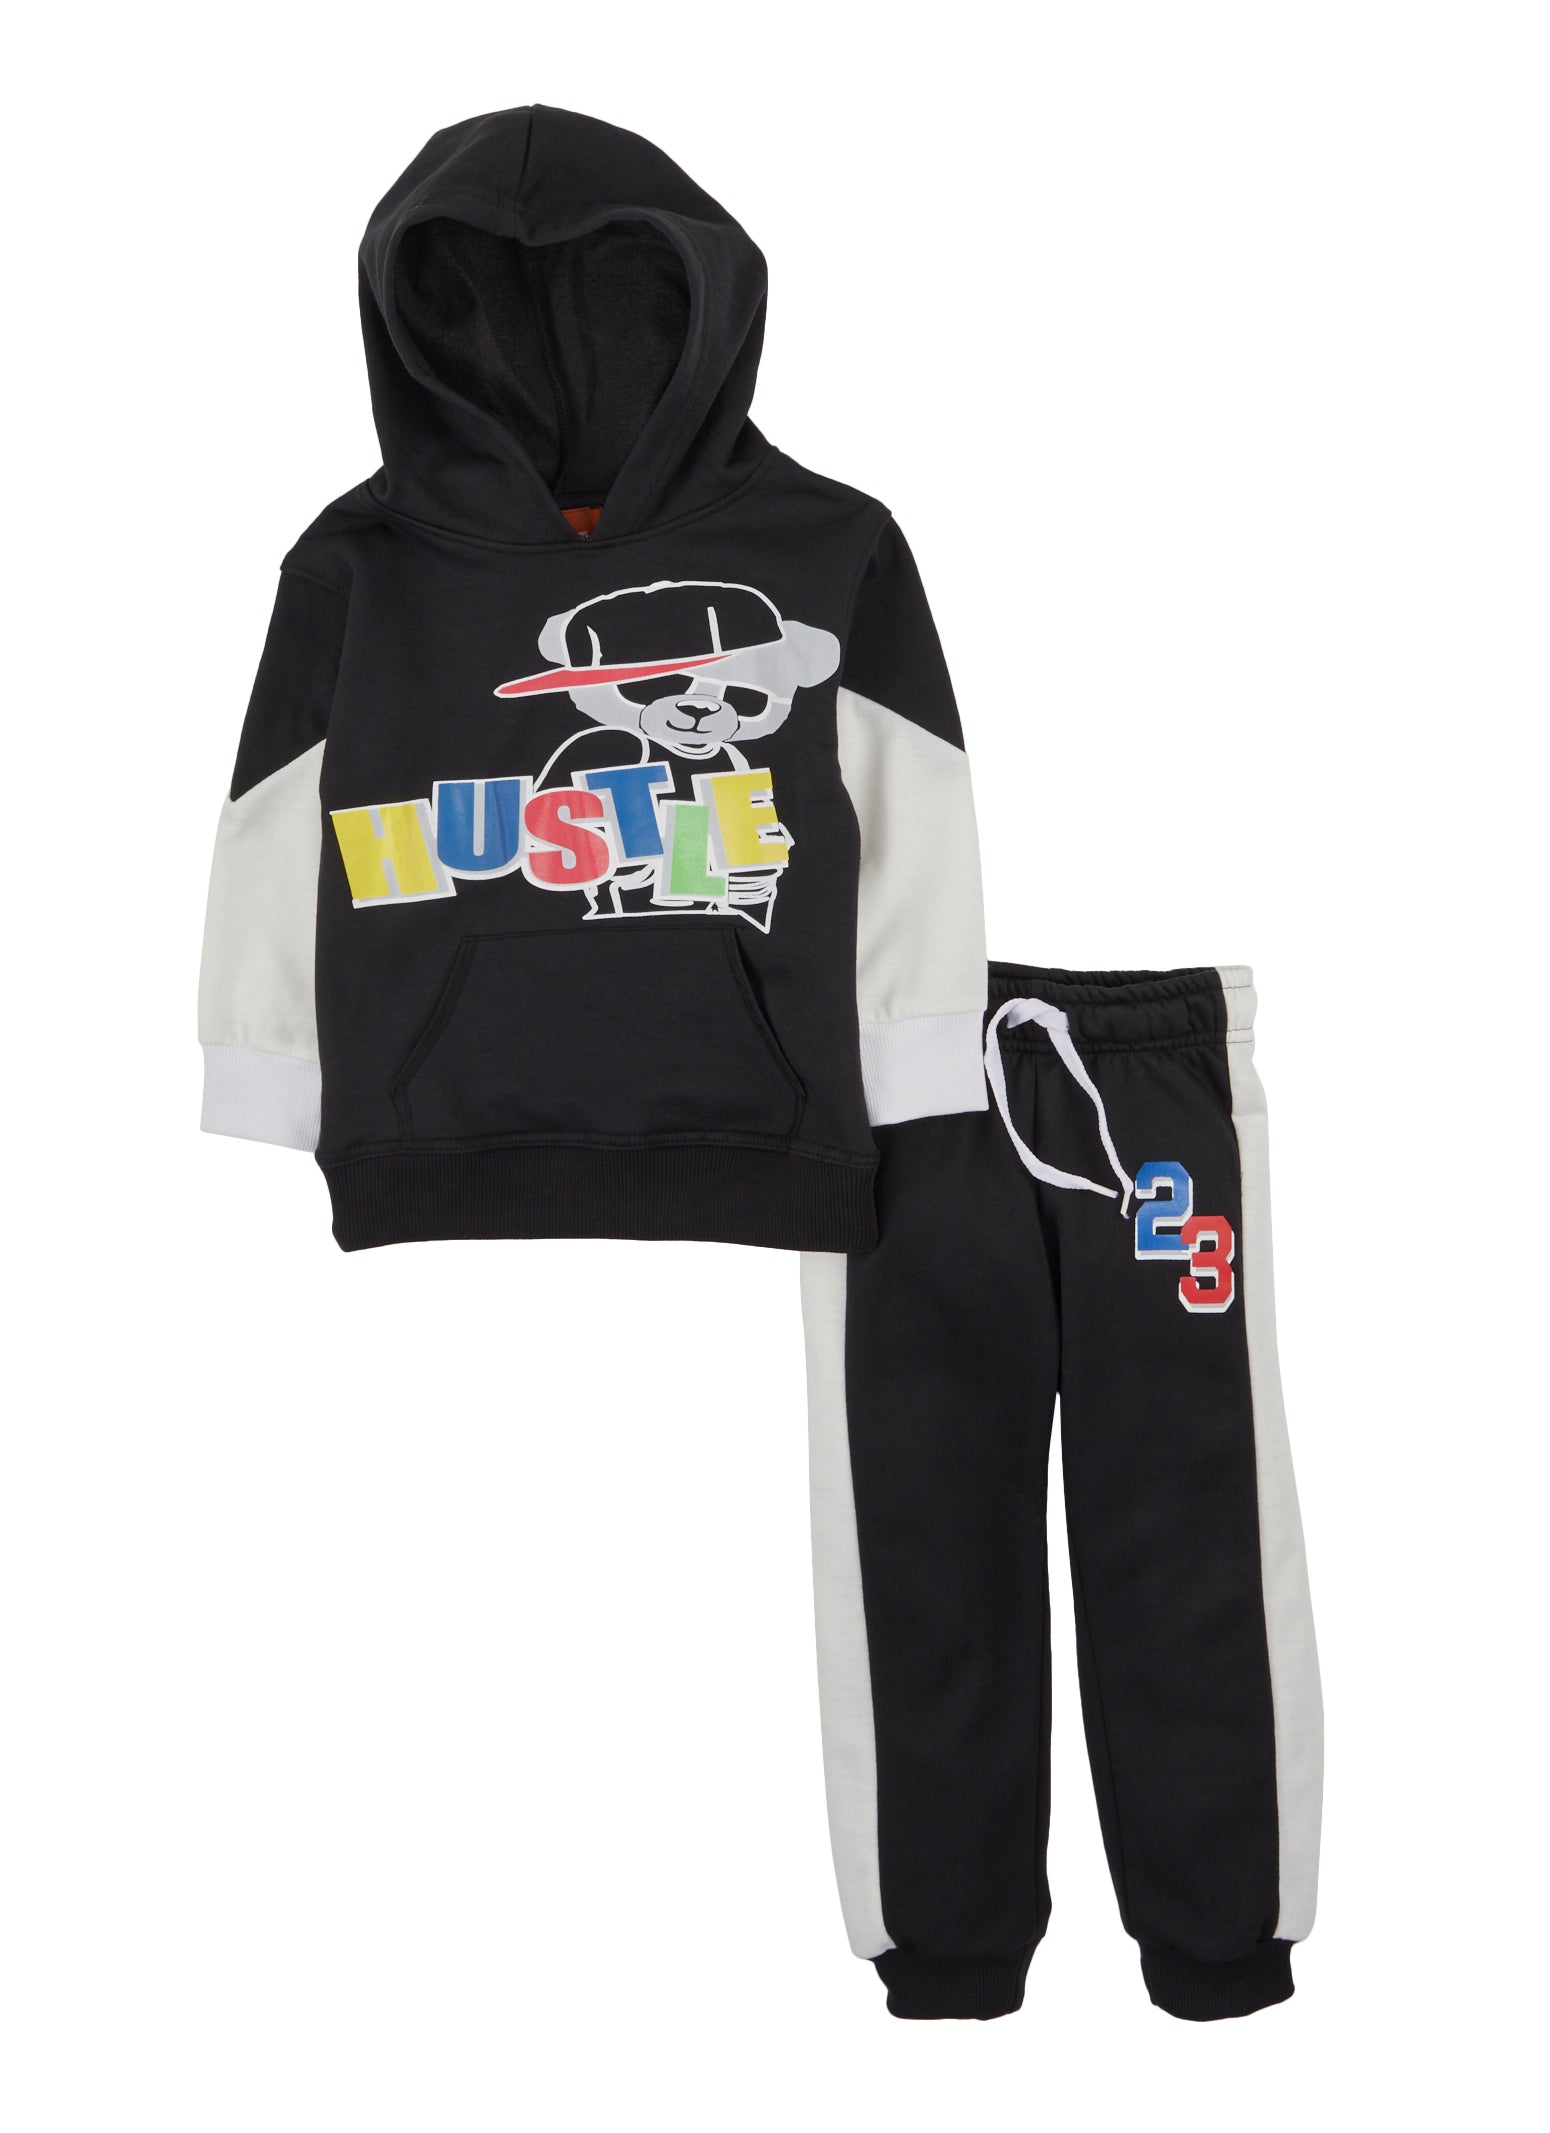 Little Boys Hustle Bear 23 Graphic Hoodie and Joggers, Black, Size 4